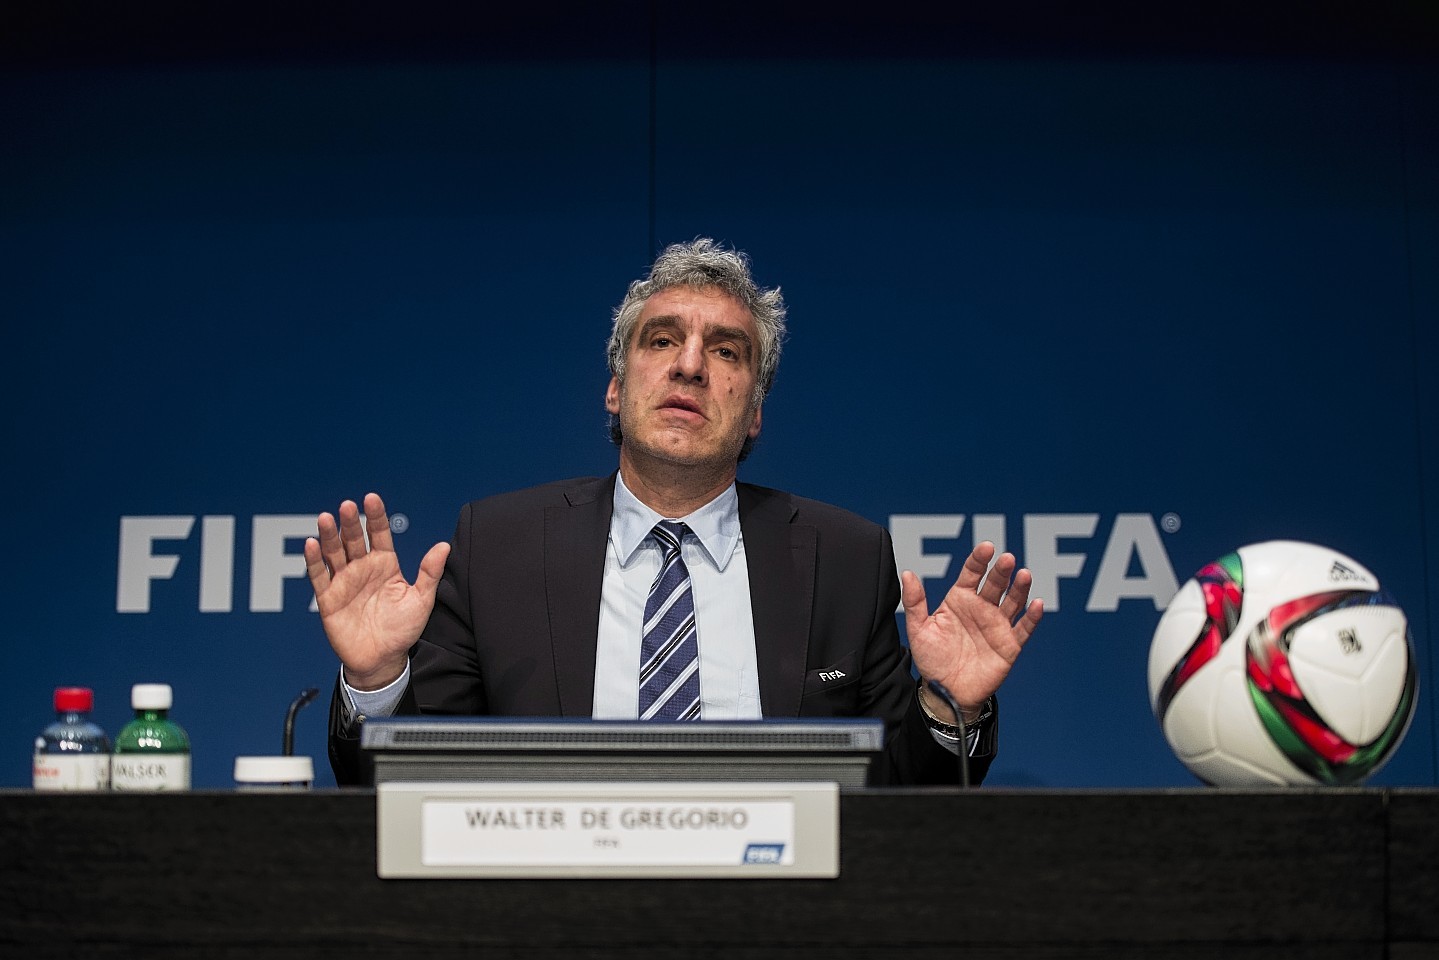 Walter De Gregorio, FIFA Director of Communications and Public Affairs, addresses the media during a press conference at the FIFA headquarters